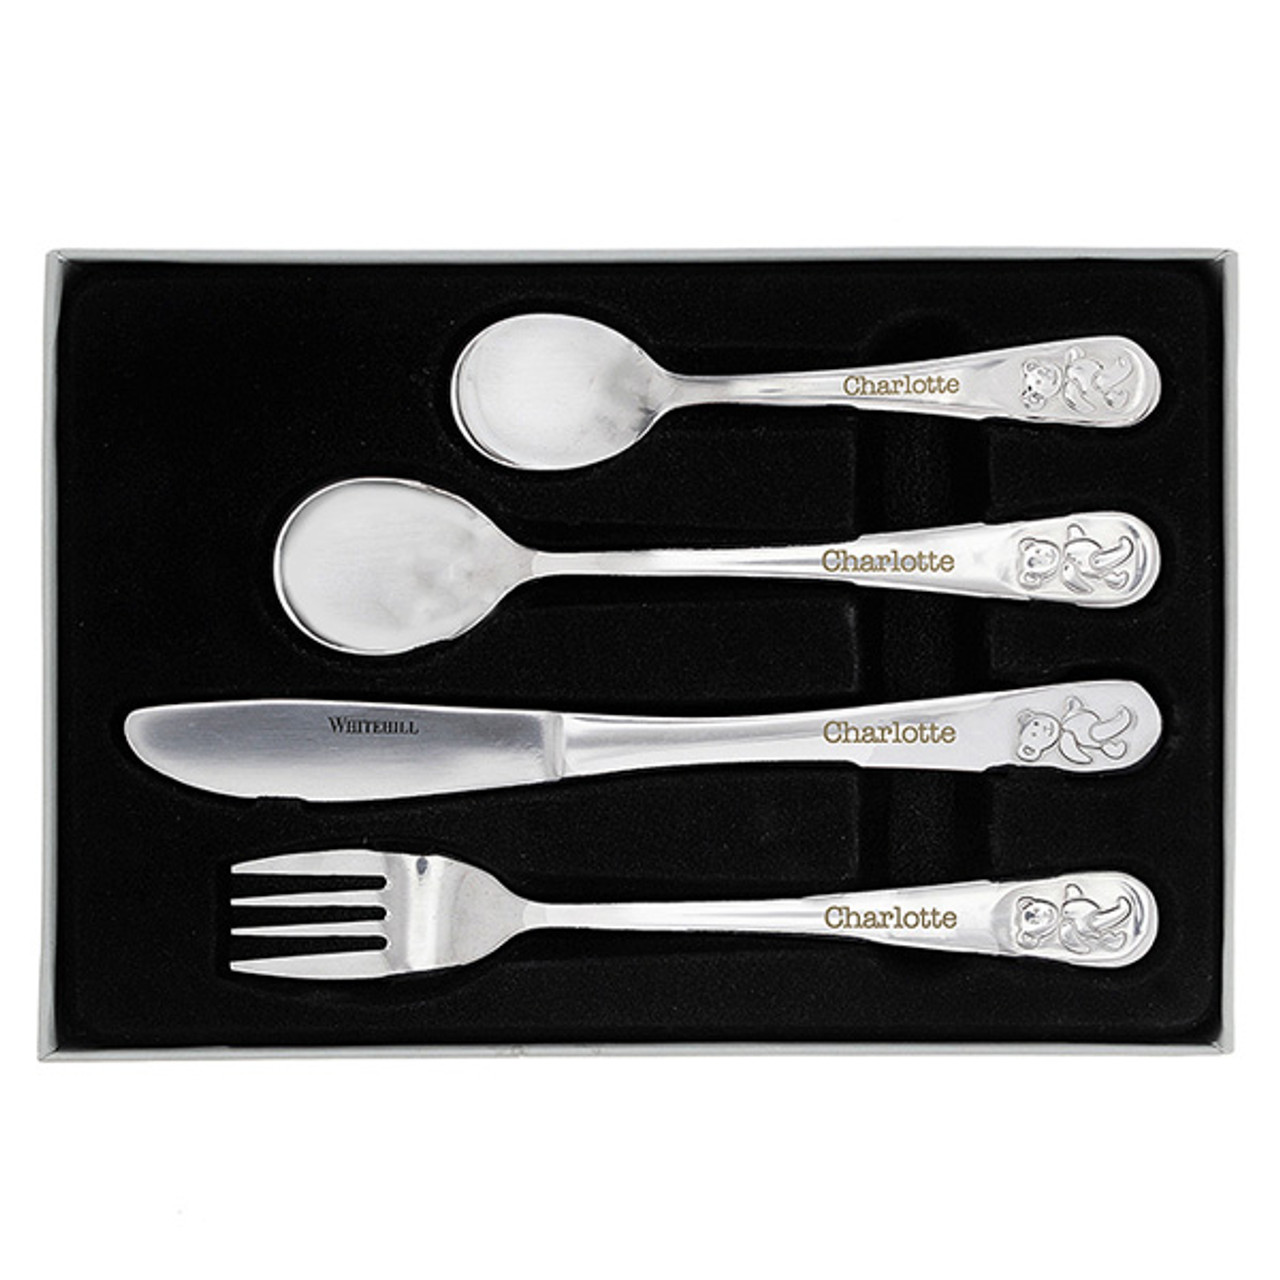 https://cdn11.bigcommerce.com/s-mk8mgl5/images/stencil/1280x1280/products/918/4410/four_piece_cutlery_set__37664.1451988648.jpg?c=2